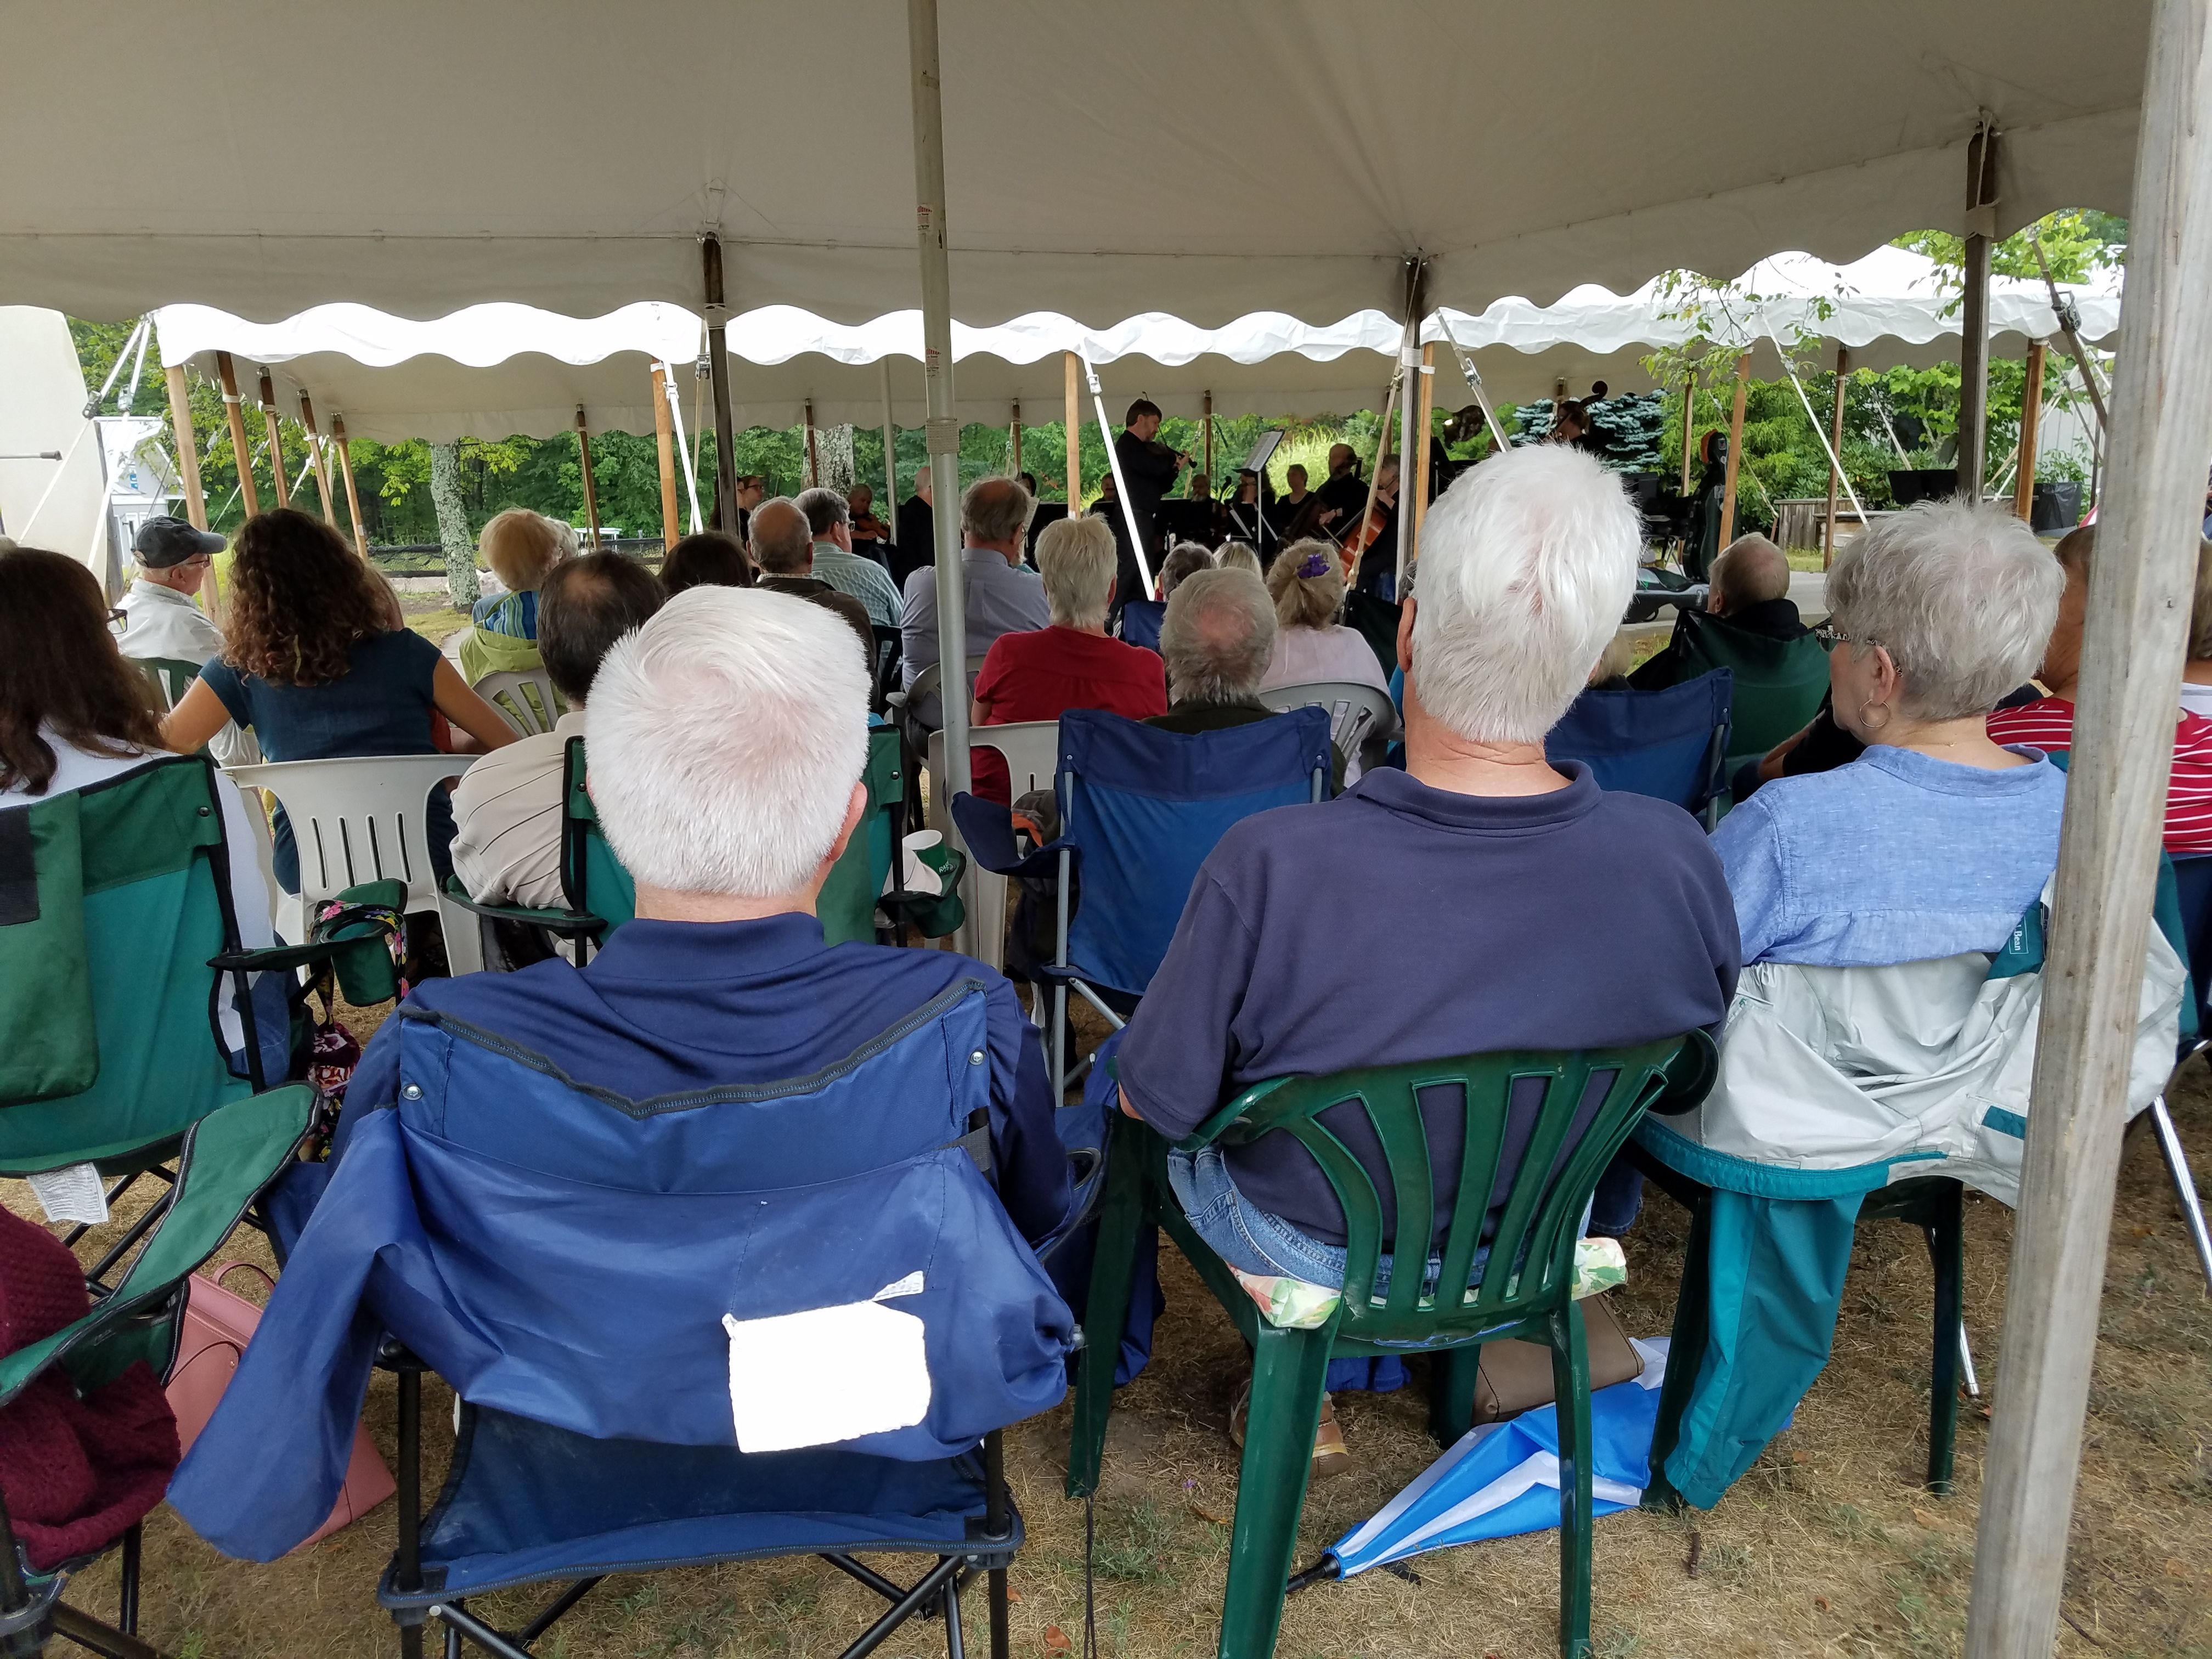 Music with Great Lakes Chamber Orchestra